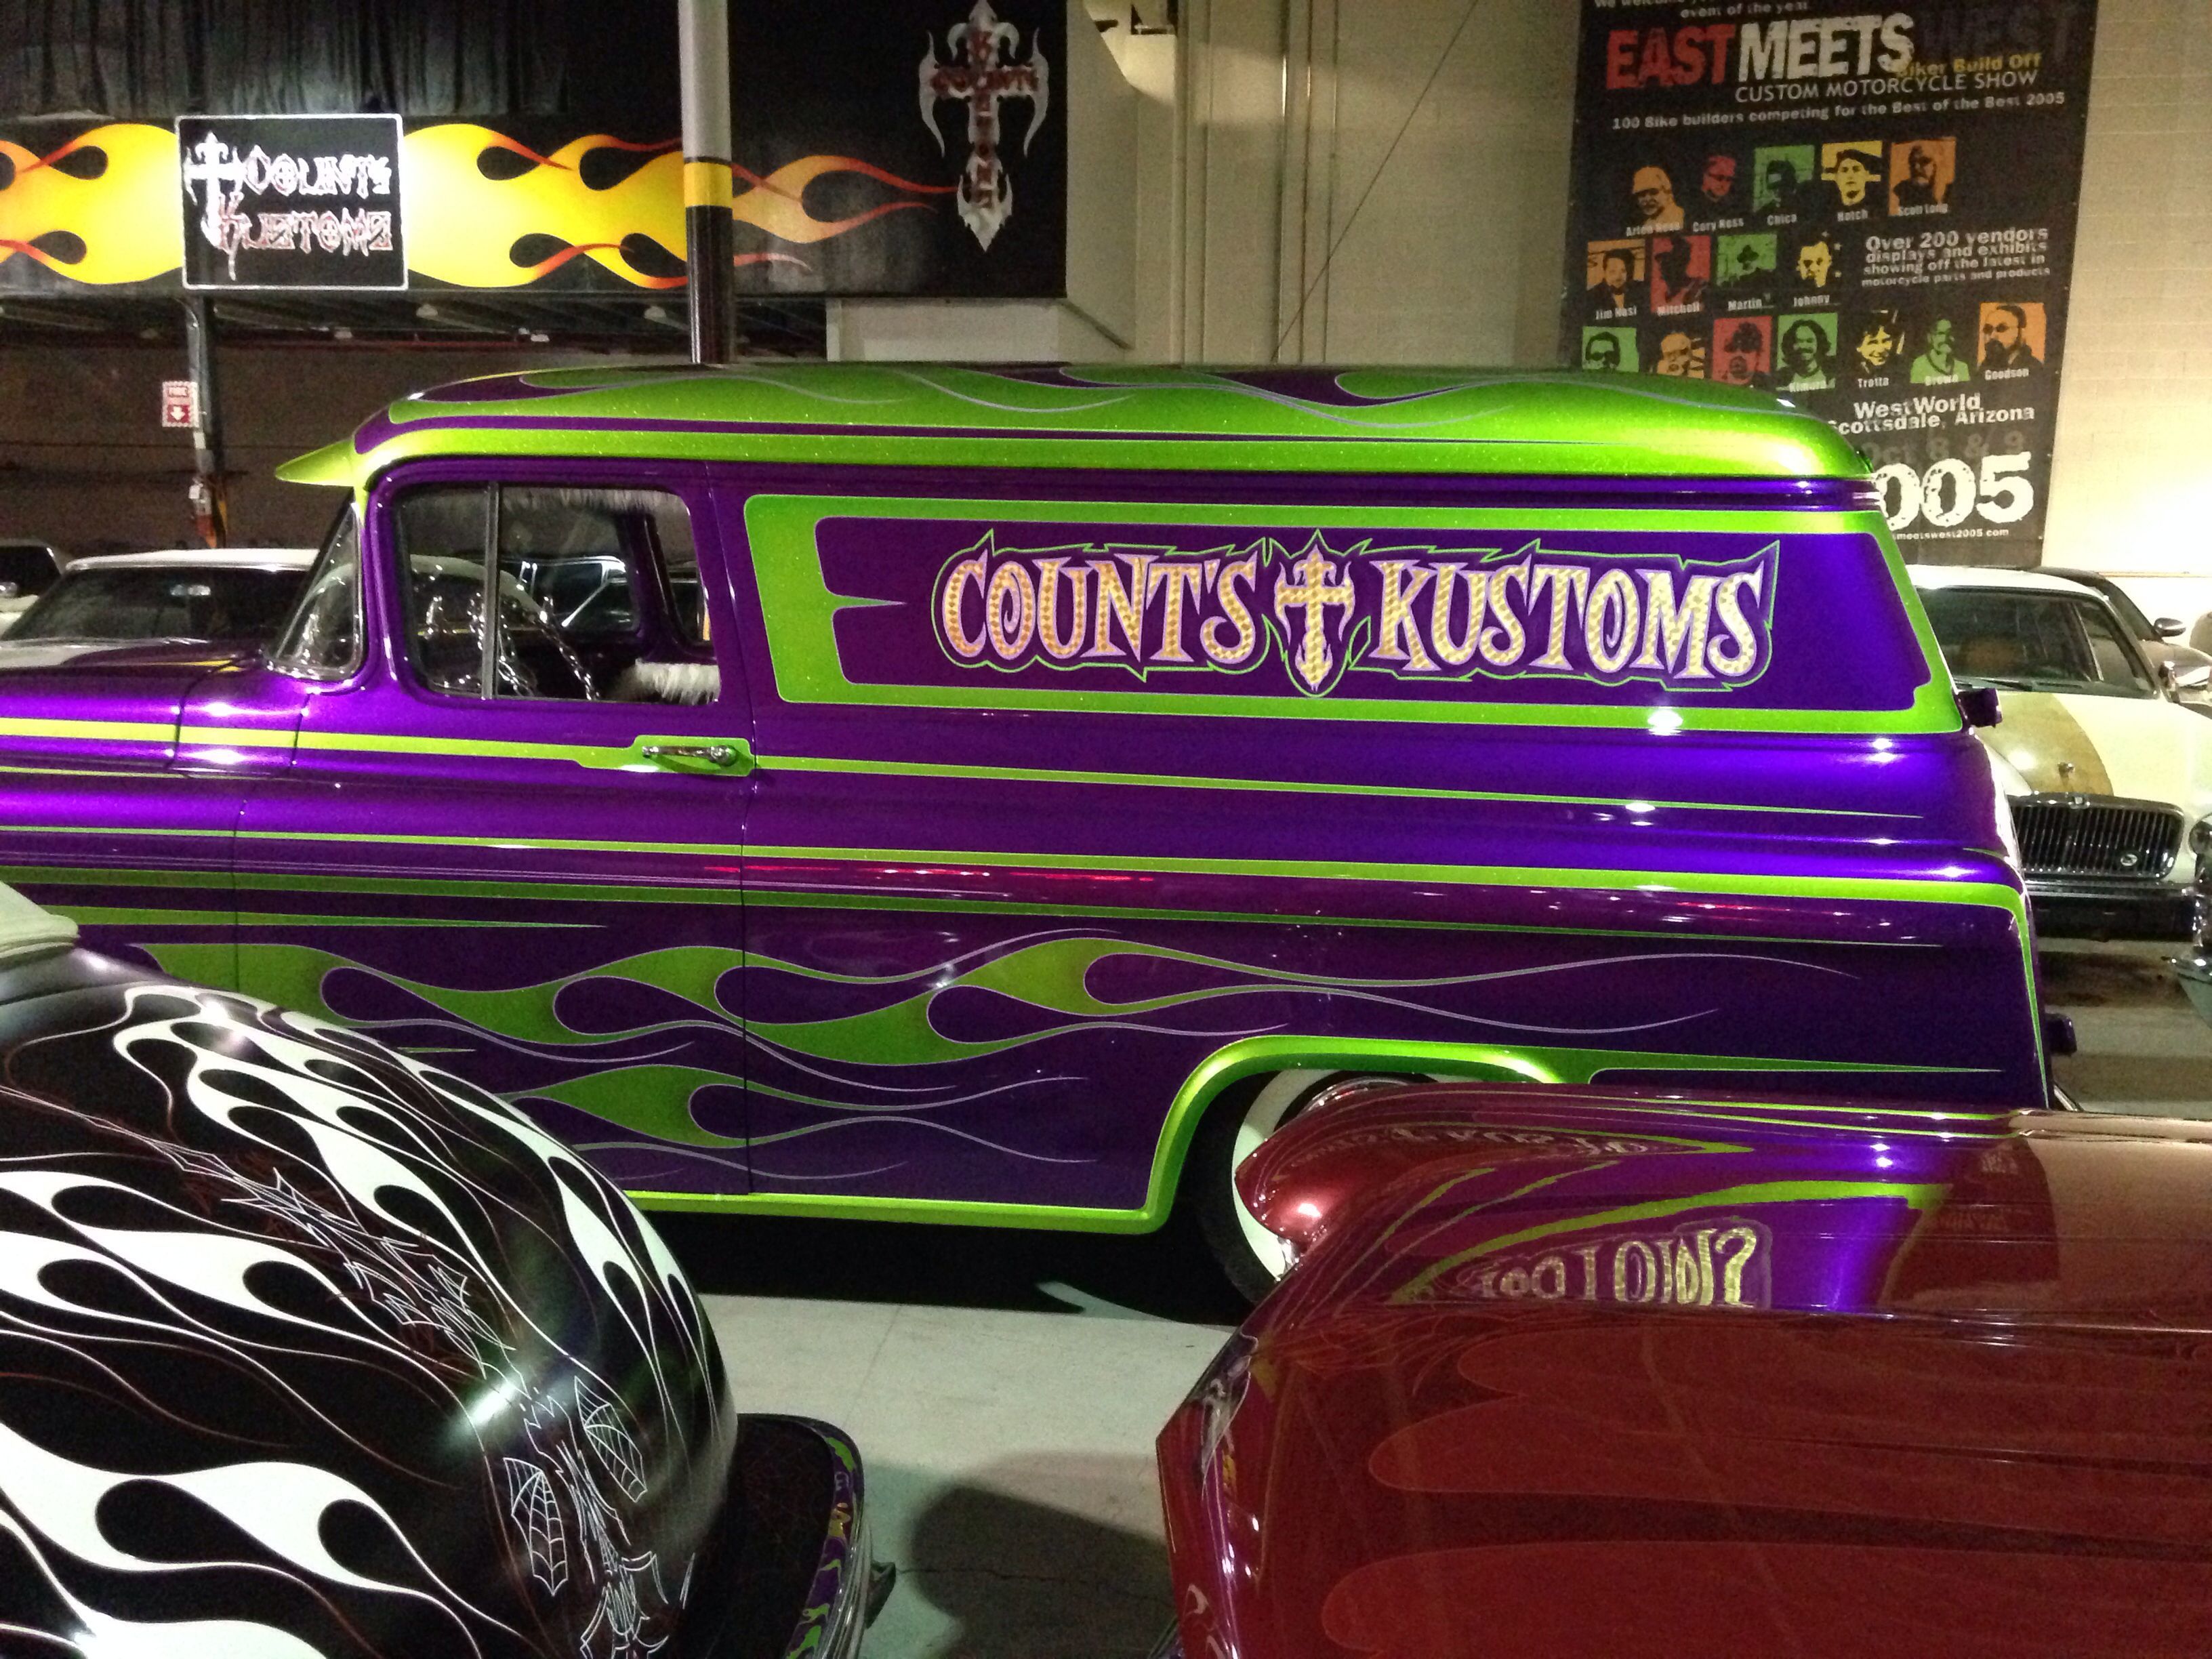 custom green and purple car with "Count's Kustoms" written on it